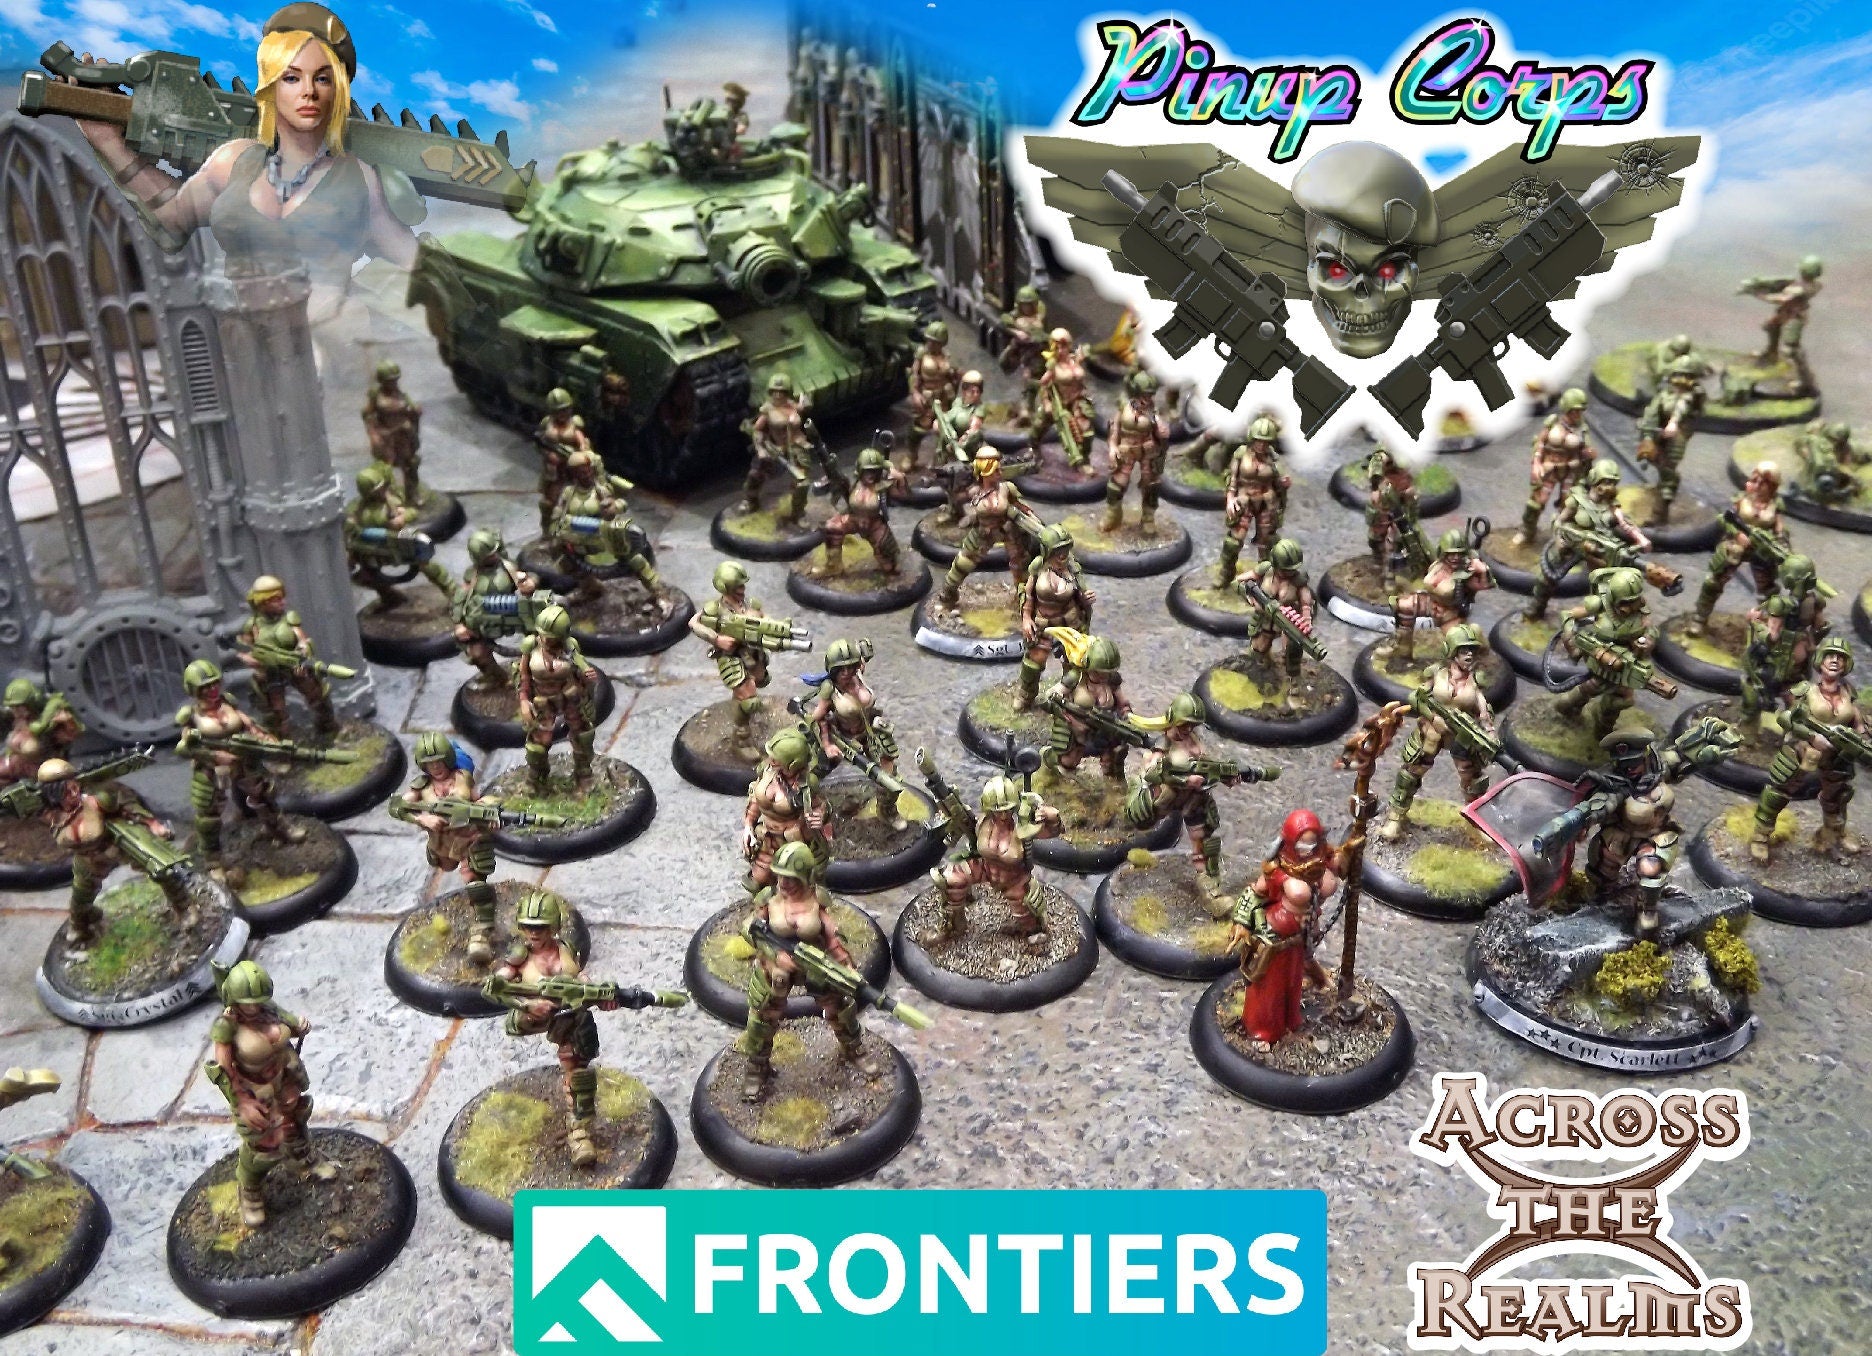 Pinup Corps Plasma "C" - Across the Realms | 28mm